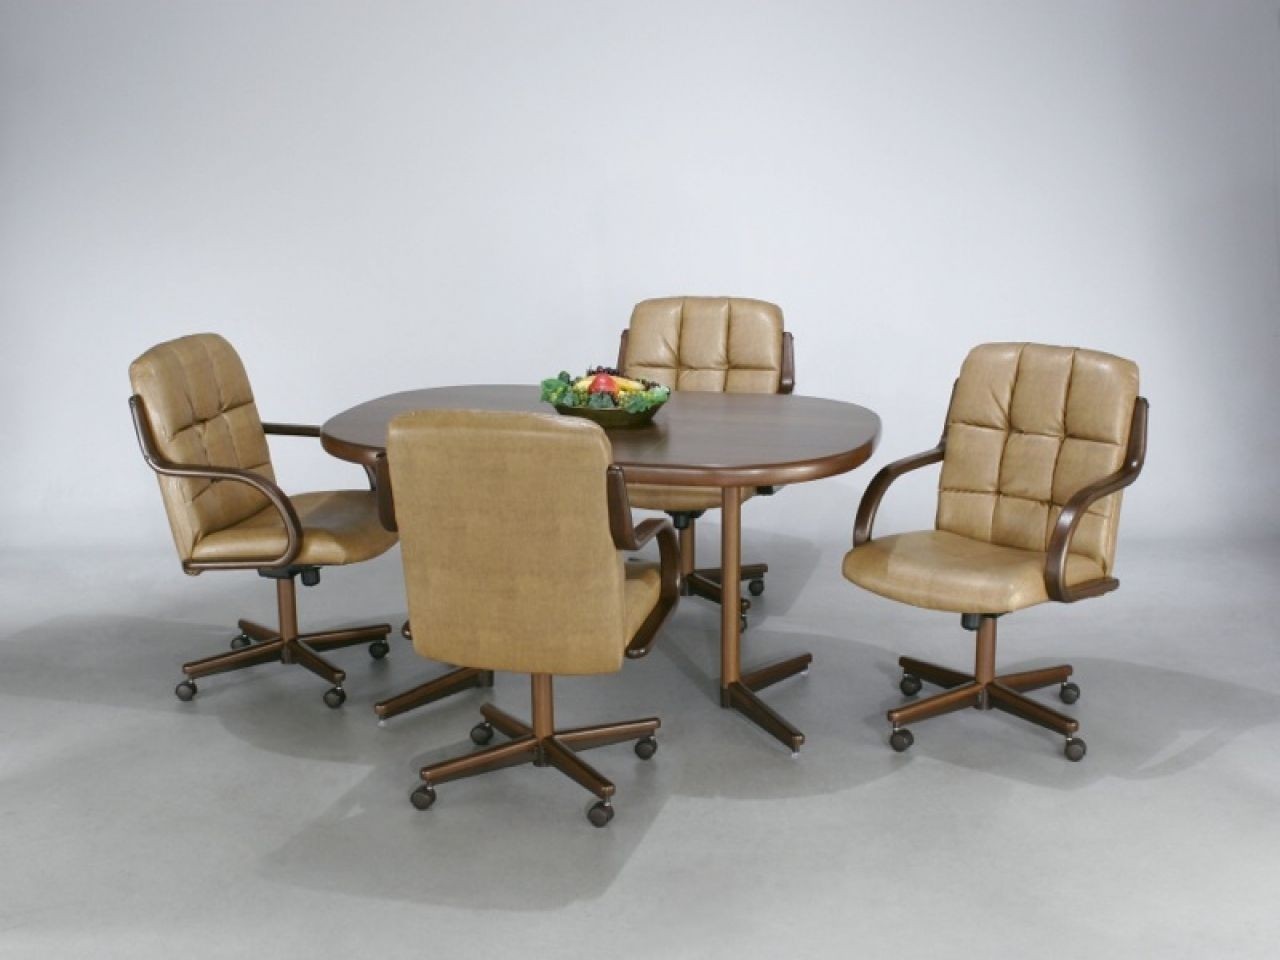 Dining room chairs with casters